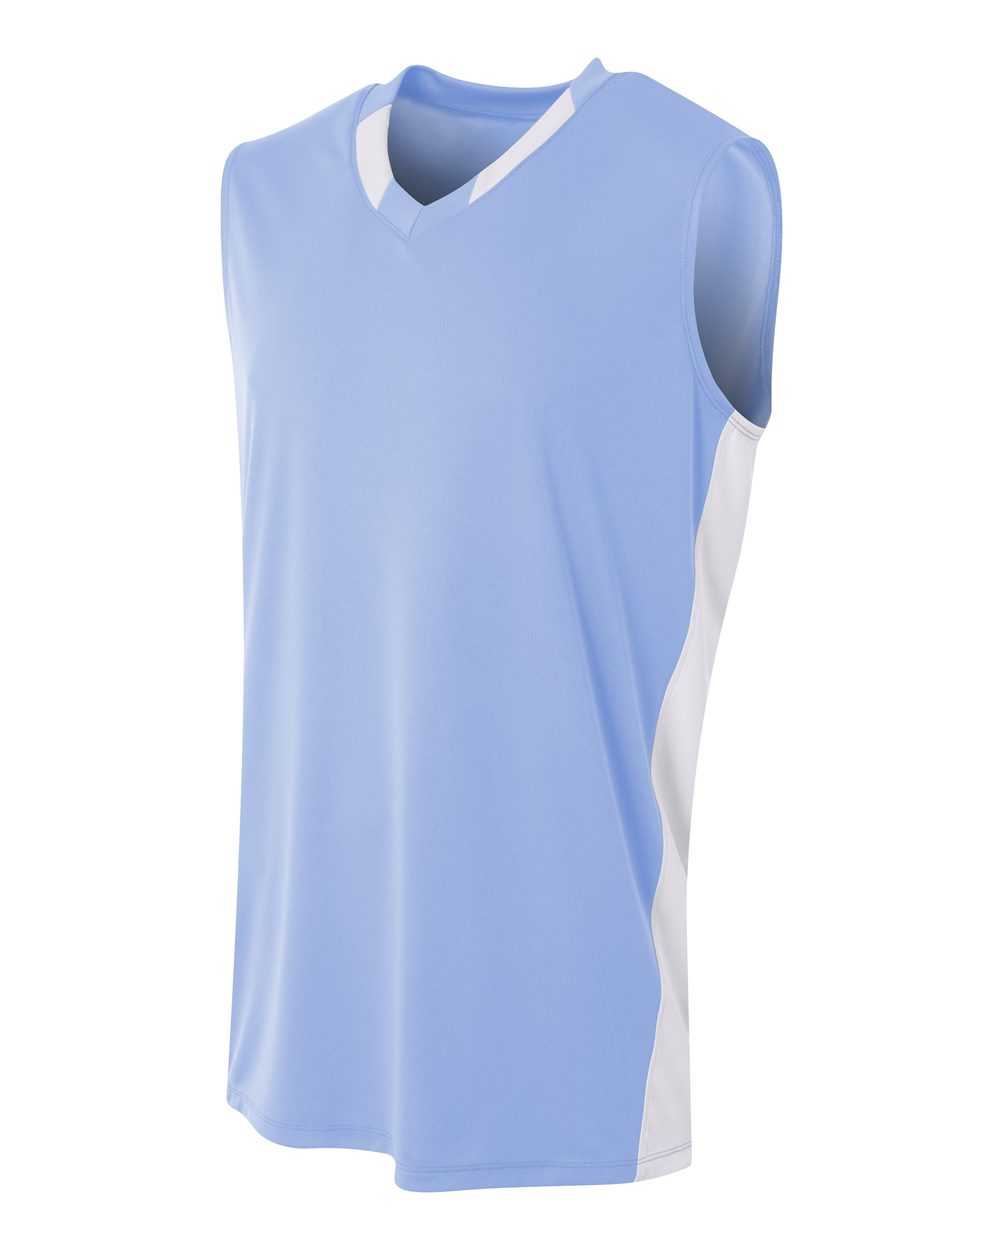 A4 NB2377 Youth Backcourt Jersey - Light Blue White - HIT a Double